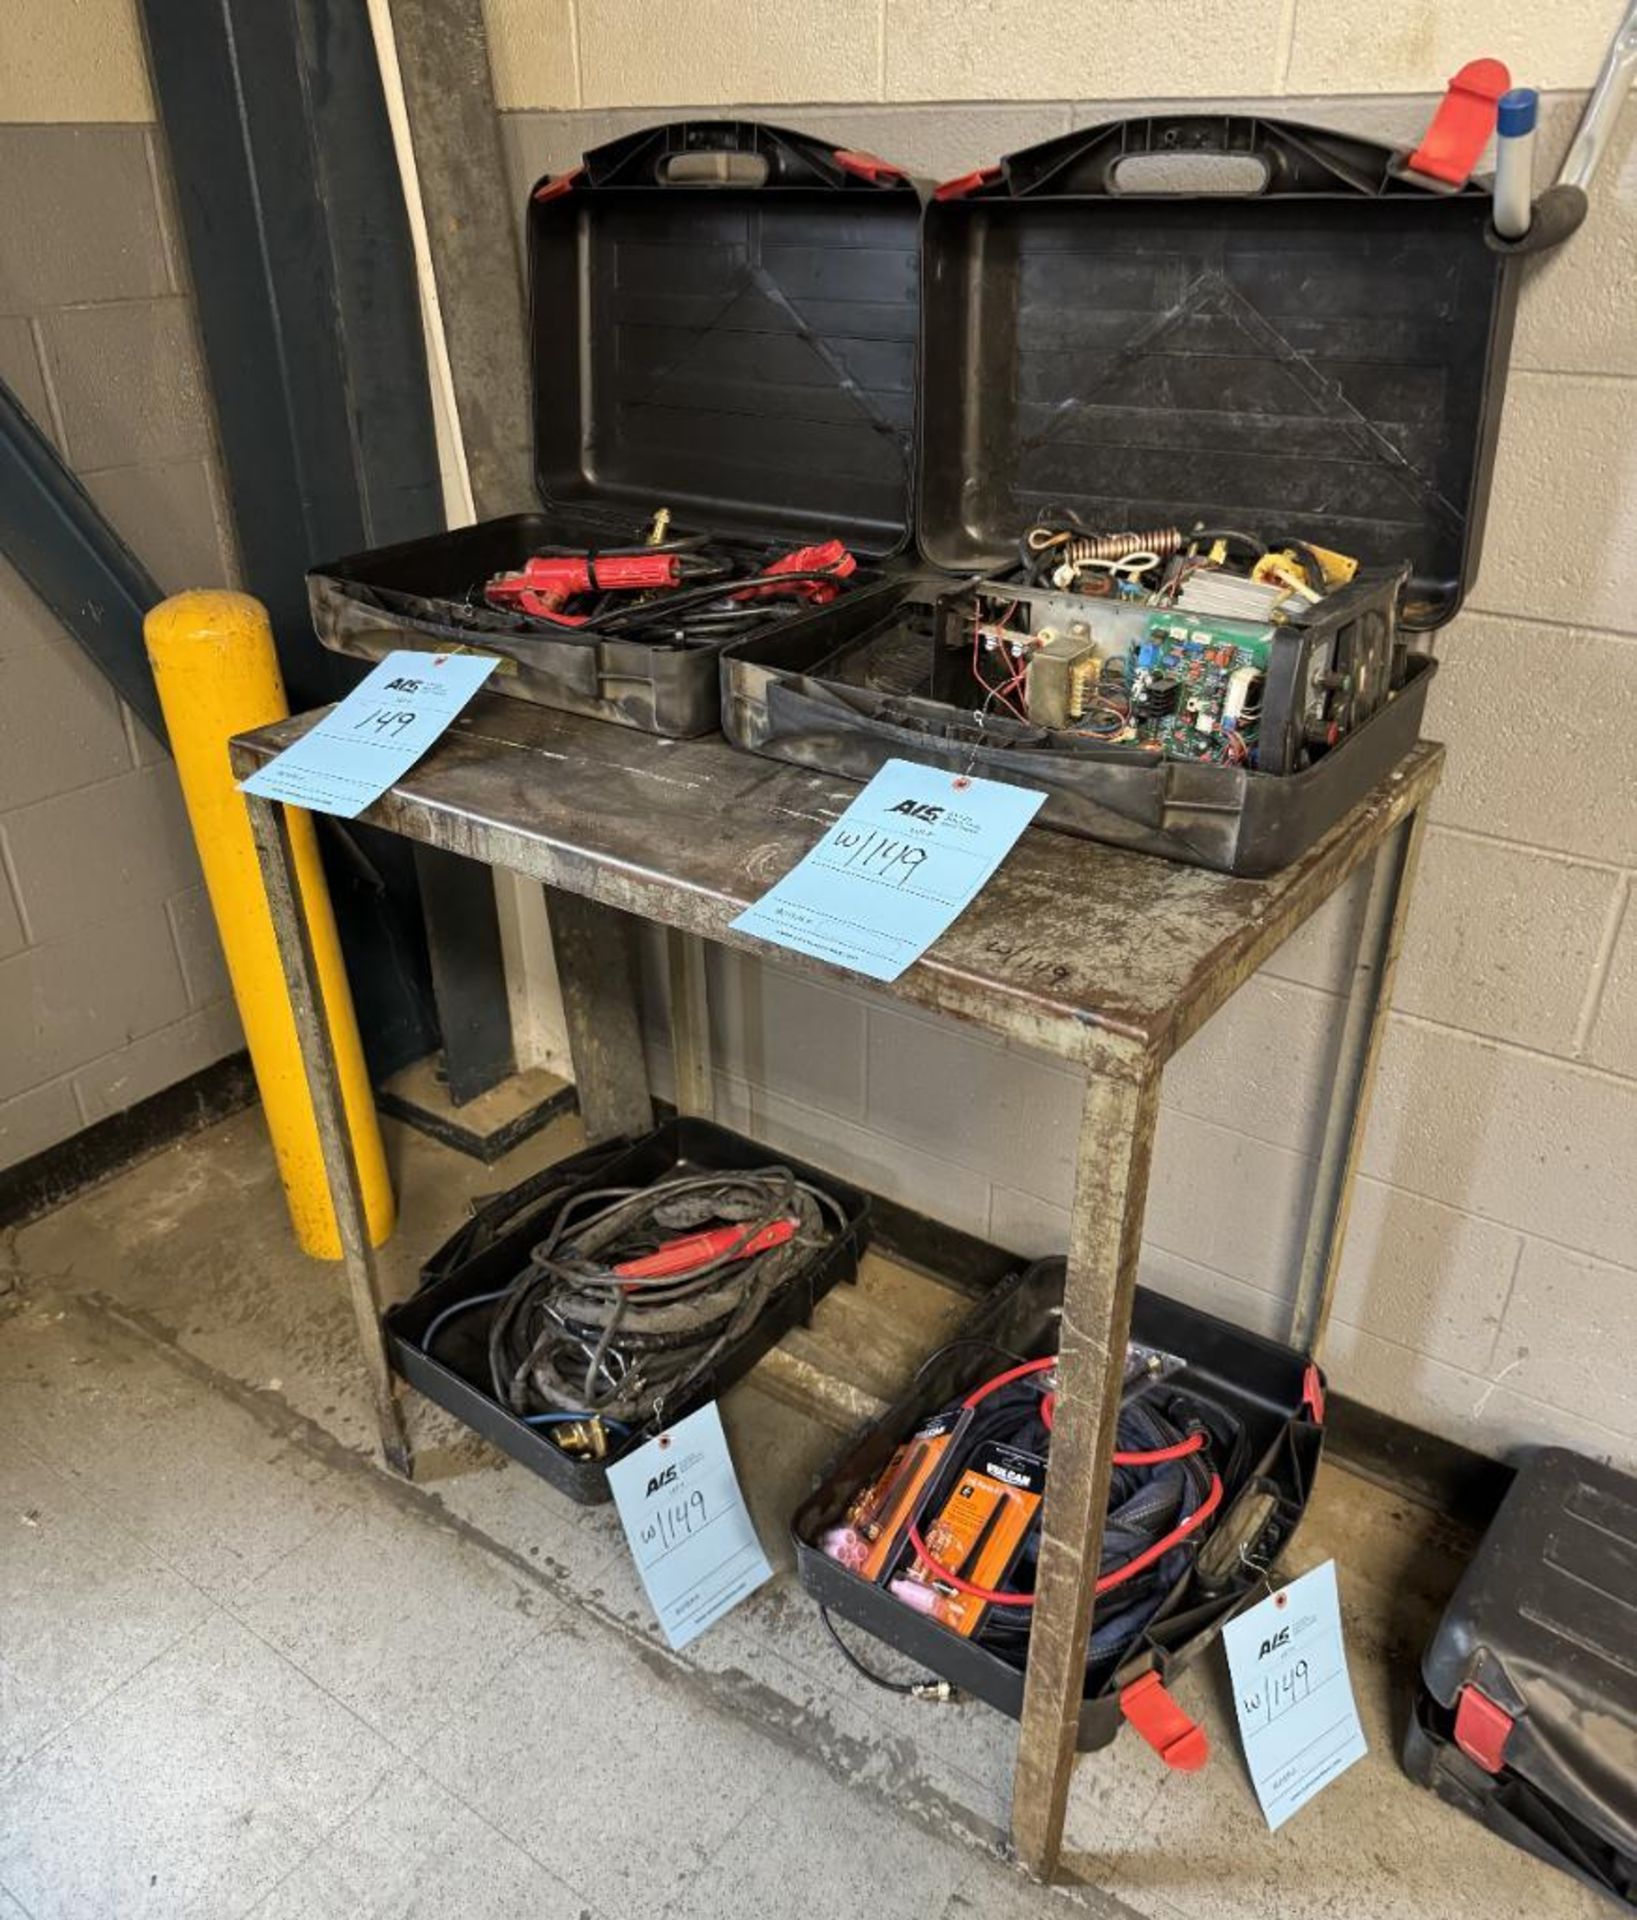 Lot Consisting Of: Everlast Powerarc 160 STH DC Tig Welding Parts Machine, misc. hoses, cords, cases